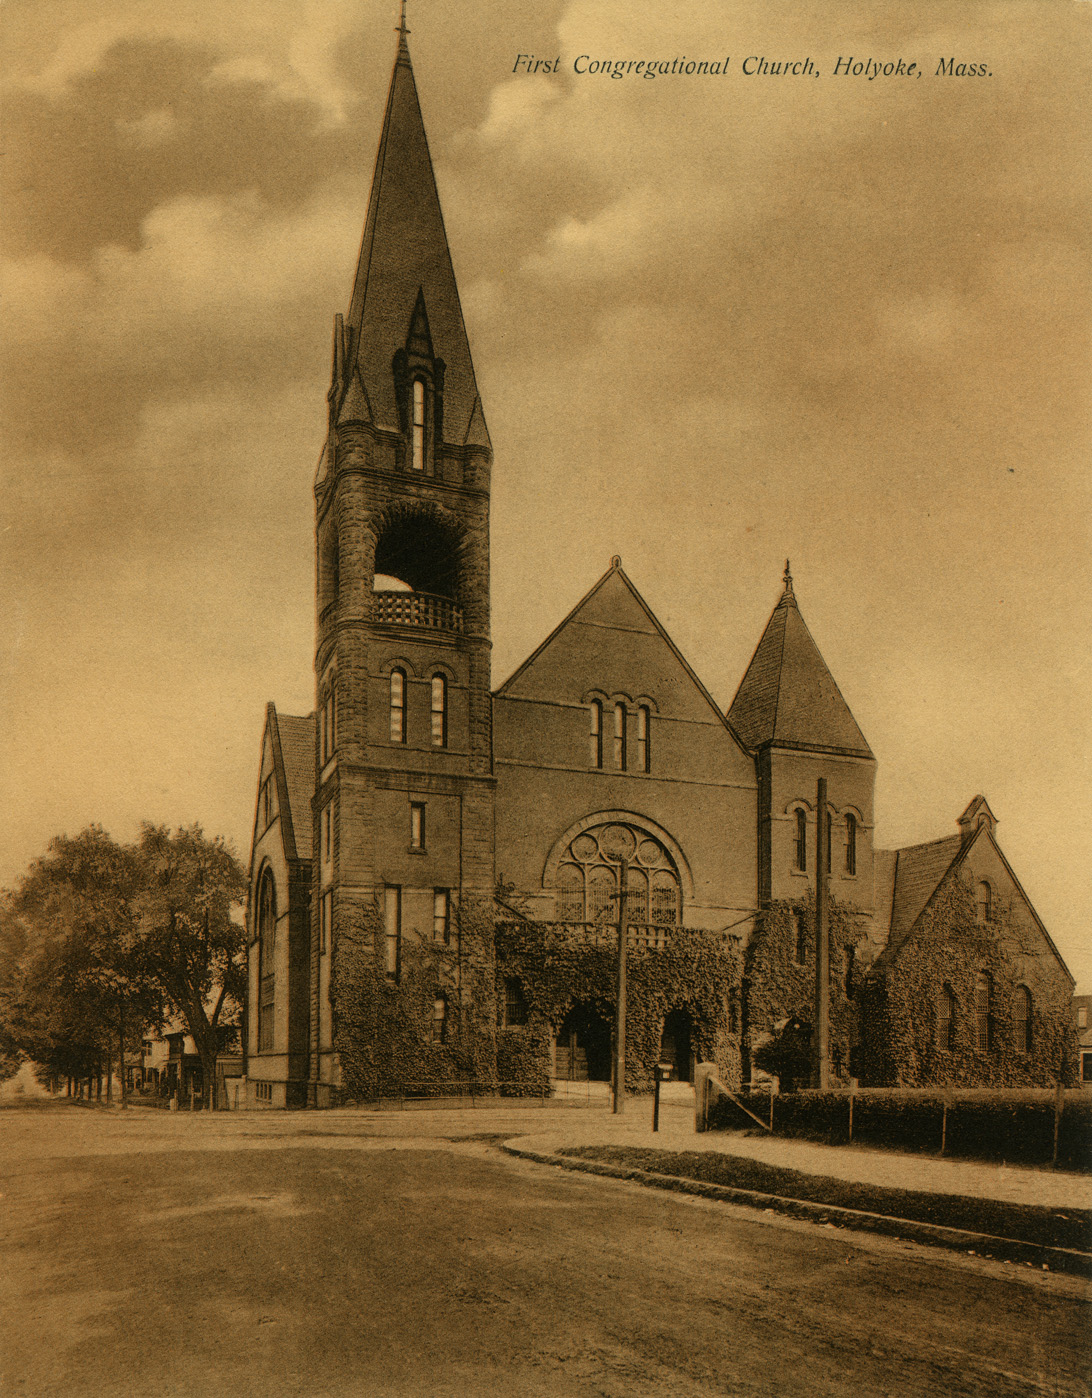 Depiction of First Congregational Church, ca.1910